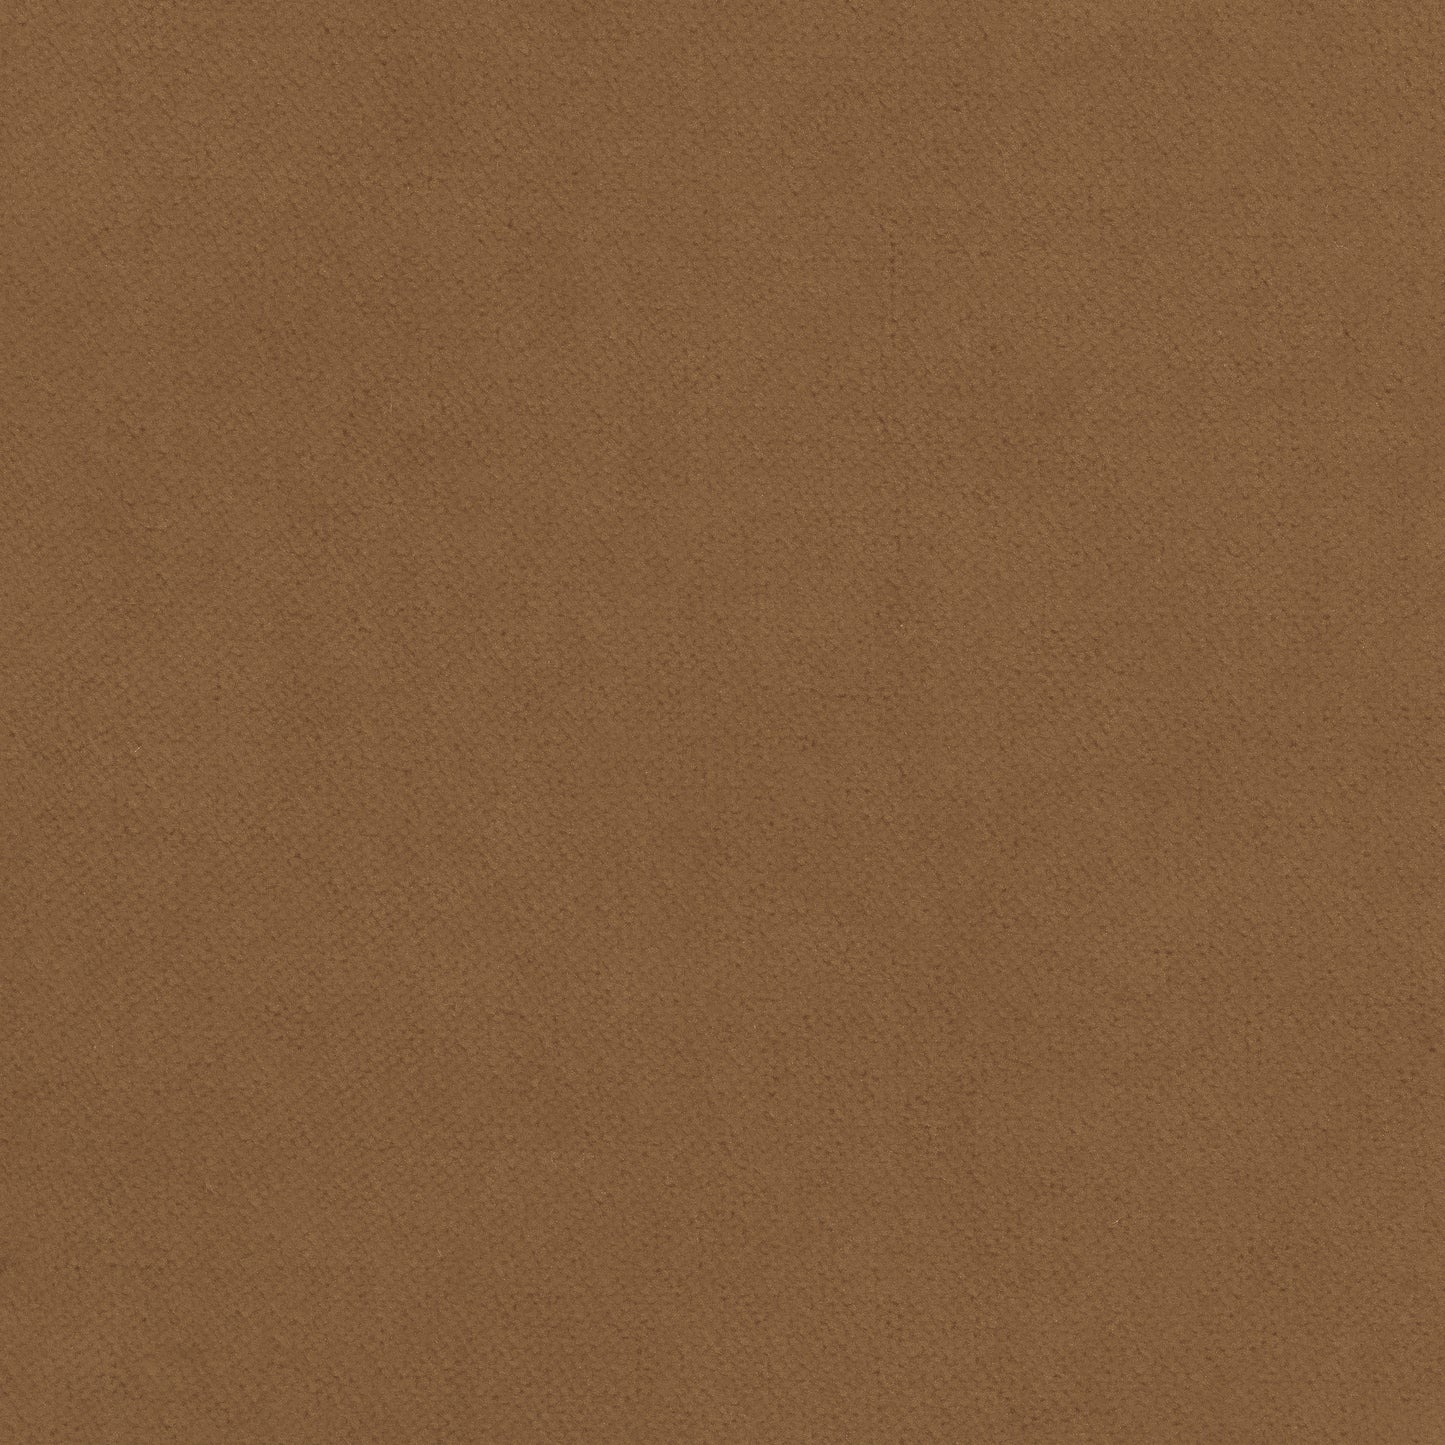 Purchase Thibaut Fabric Pattern# W7230 pattern name Club Velvet color Camel